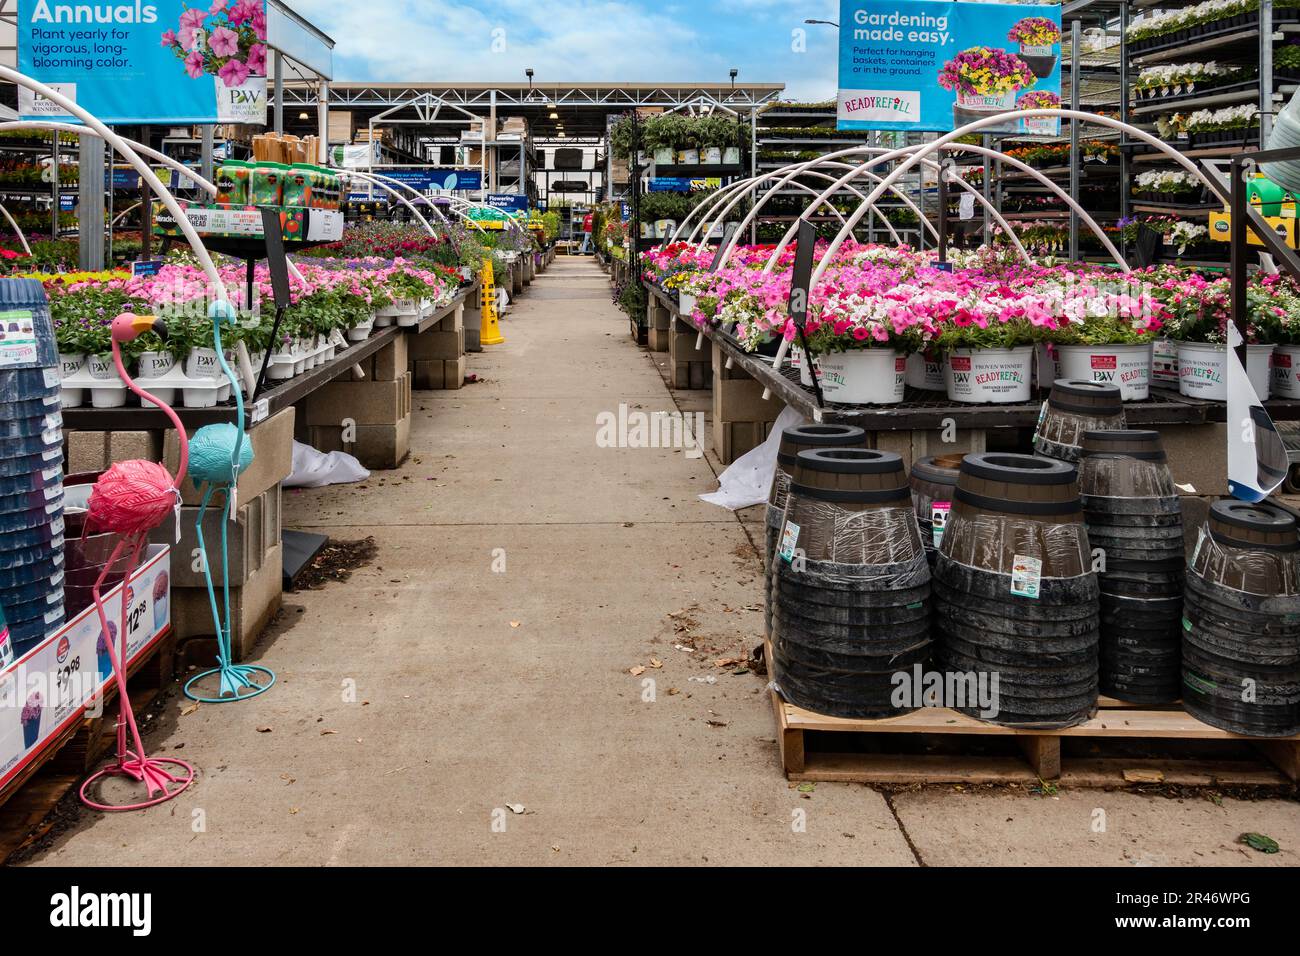 Rows of flowering bedding plants and distant Lowe’s employee at Lowe’s Garden Center in Wichita, Kansas, USA. Stock Photo